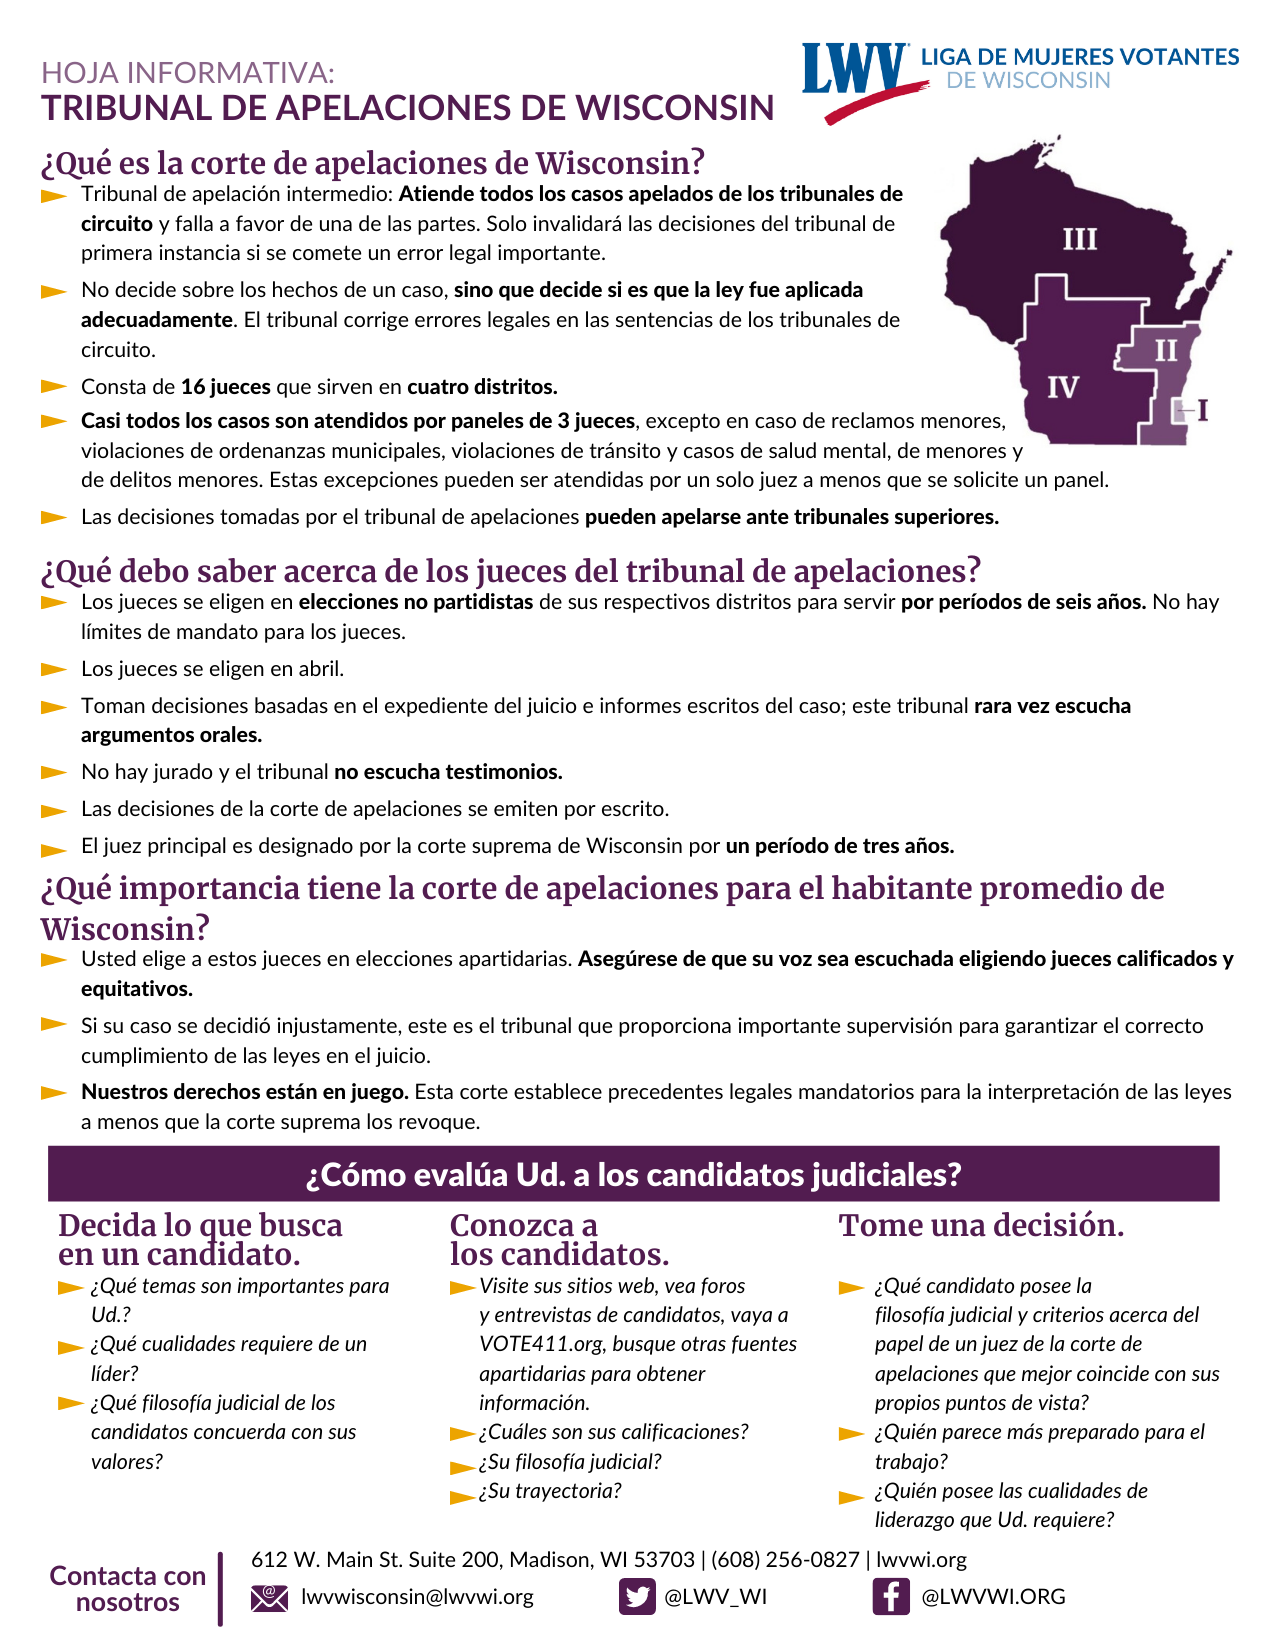 Fact sheet of the Court of Appeals in Spanish